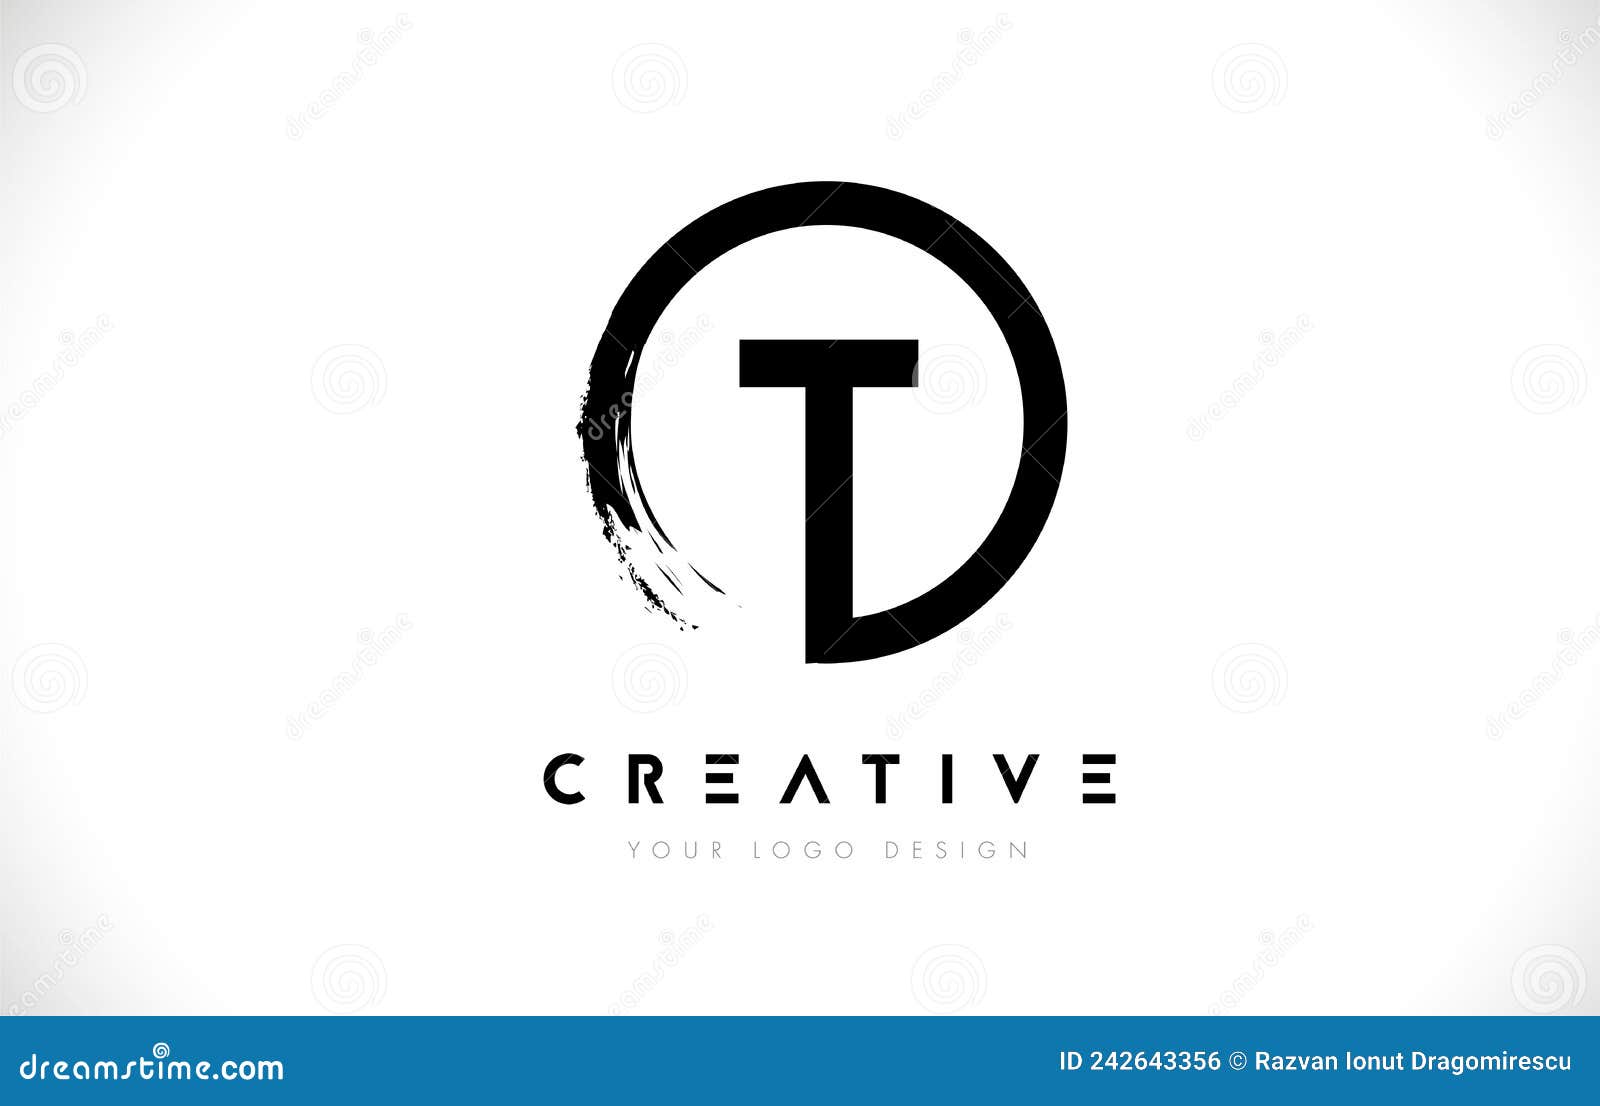 T Letter Logo with Circle Brush Design and White Background Stock